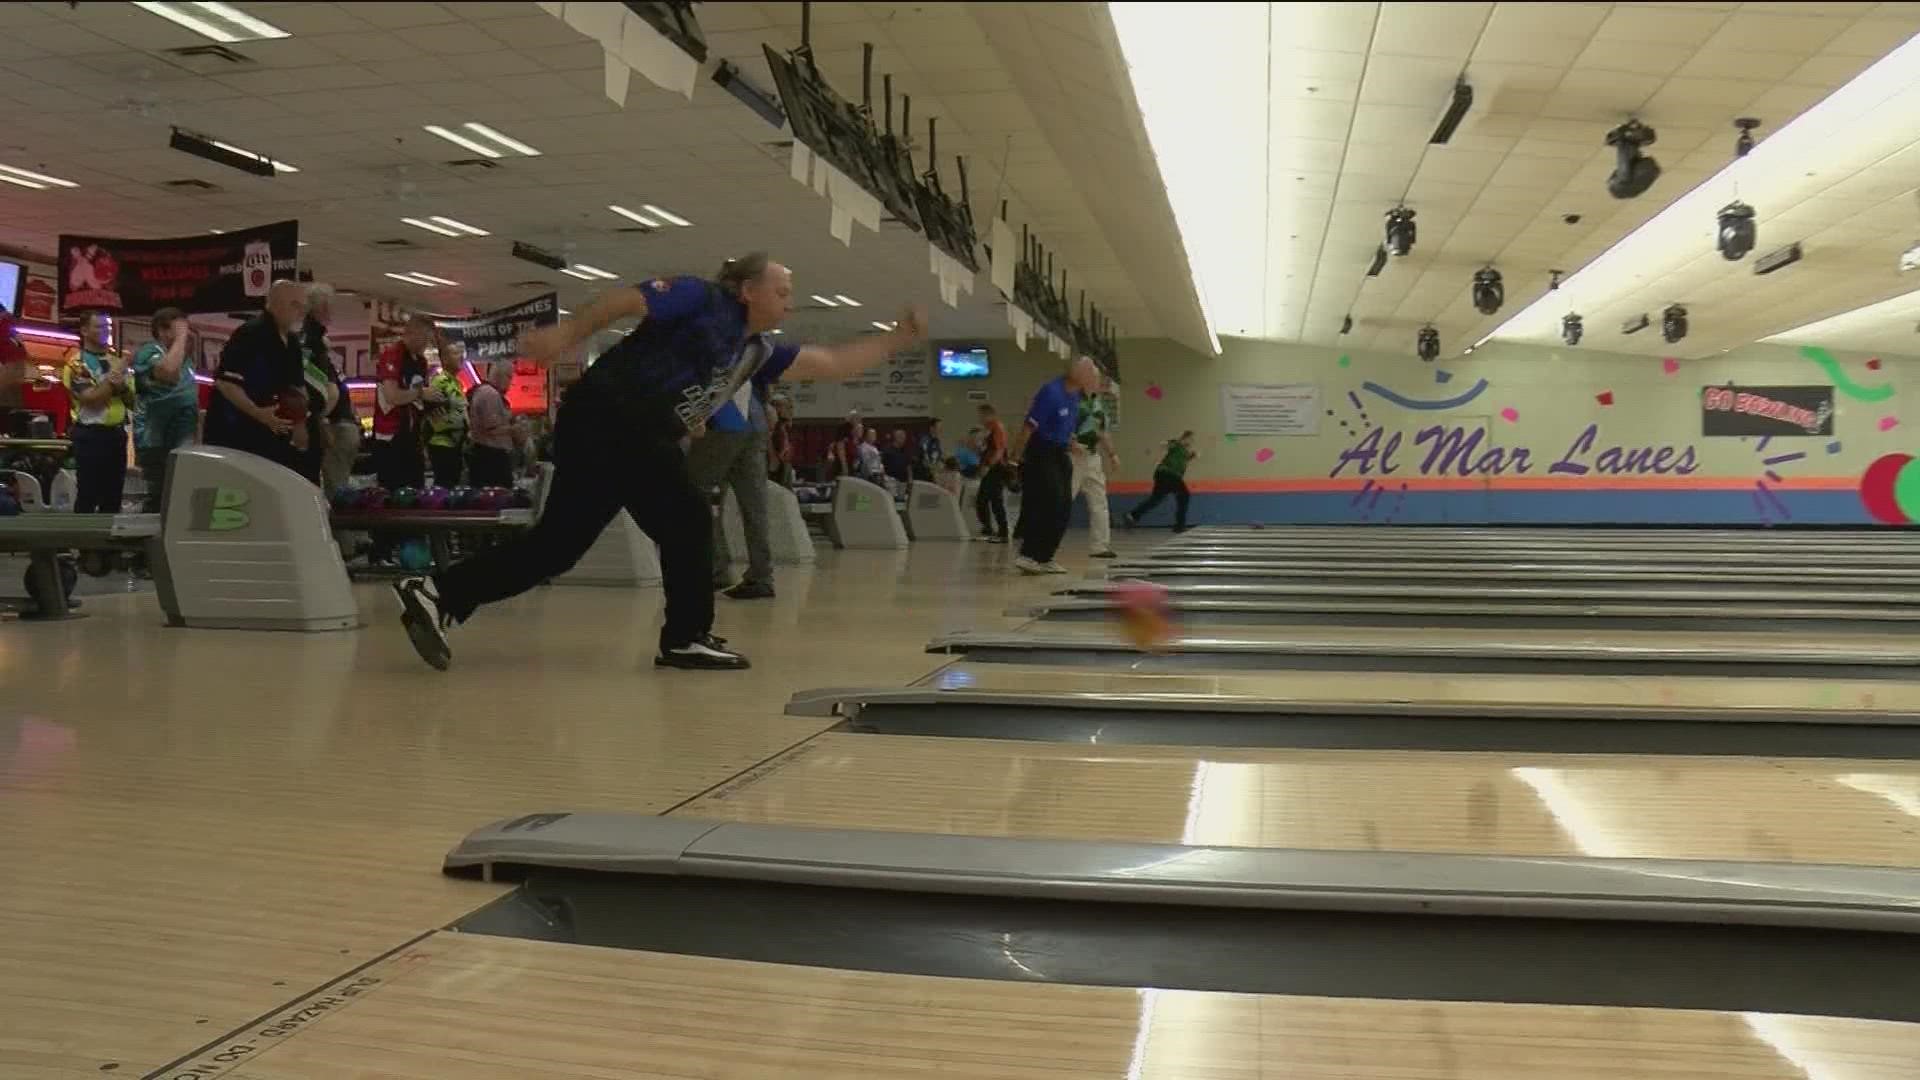 Al-Mar Lanes holds practice session ahead of this weekend's Regional tournament.